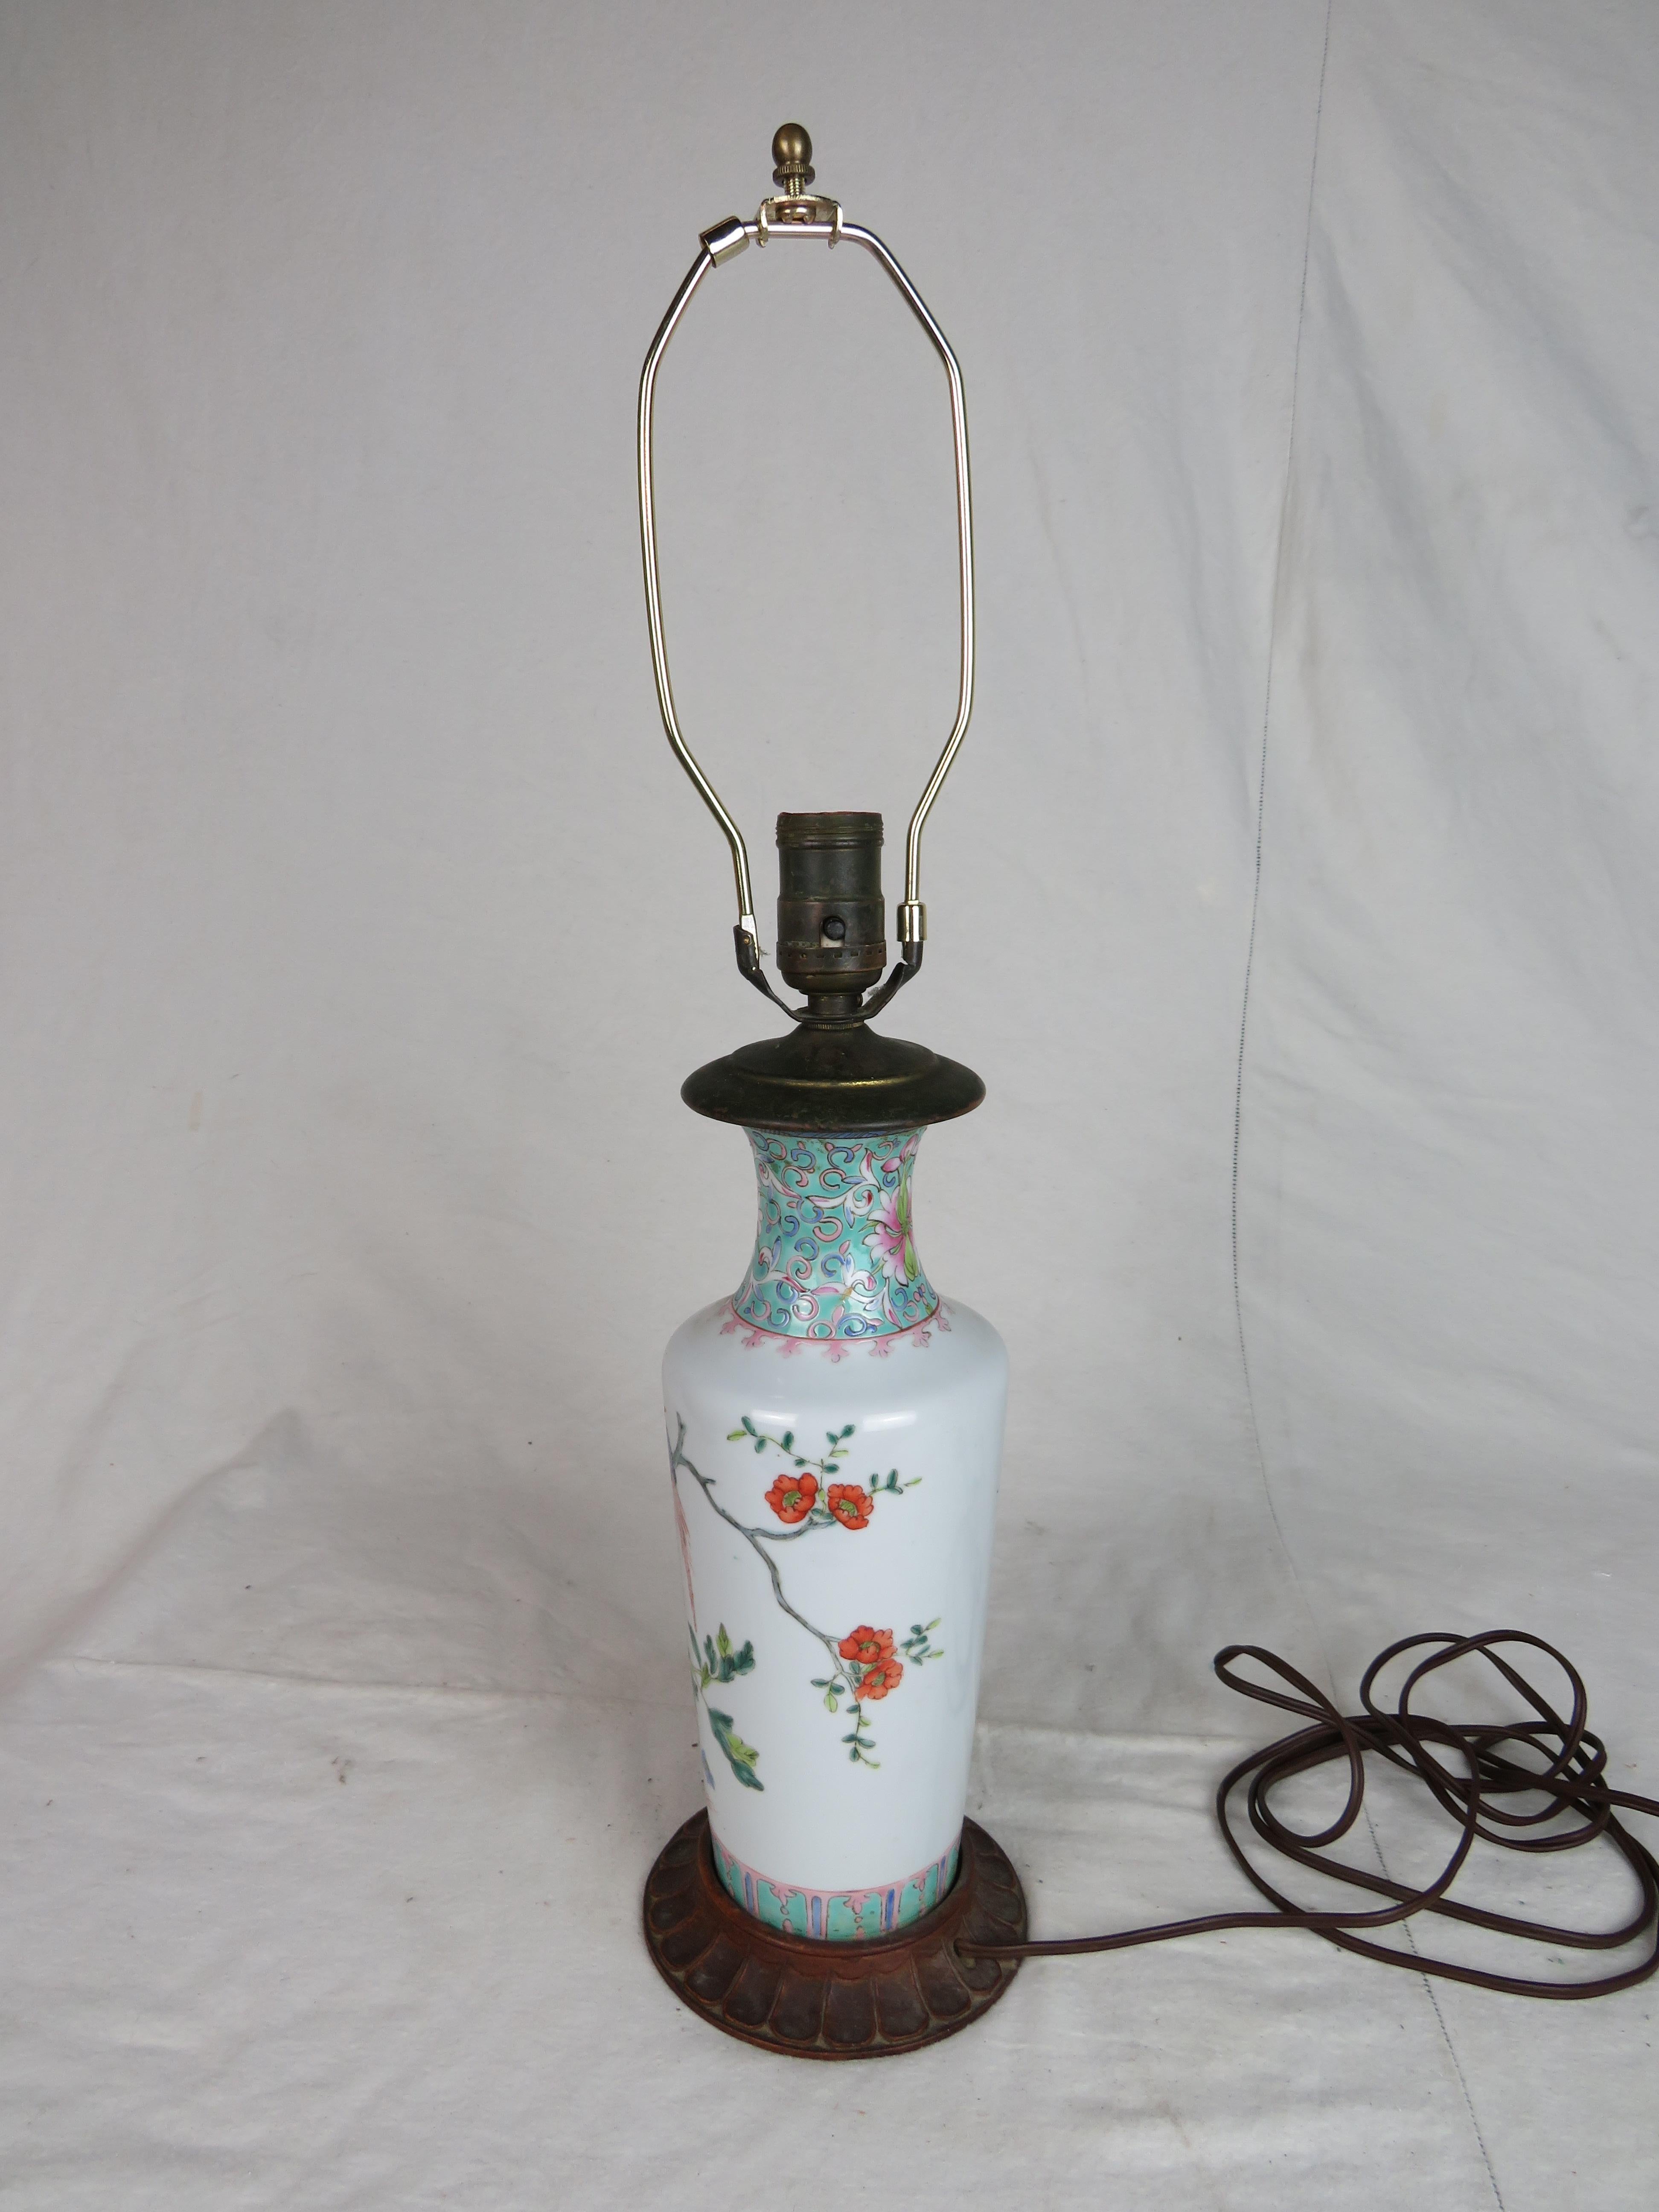 19th Century Ceramic Vase with Floral and Bird Motif Converted to Lamp In Good Condition For Sale In Nantucket, MA